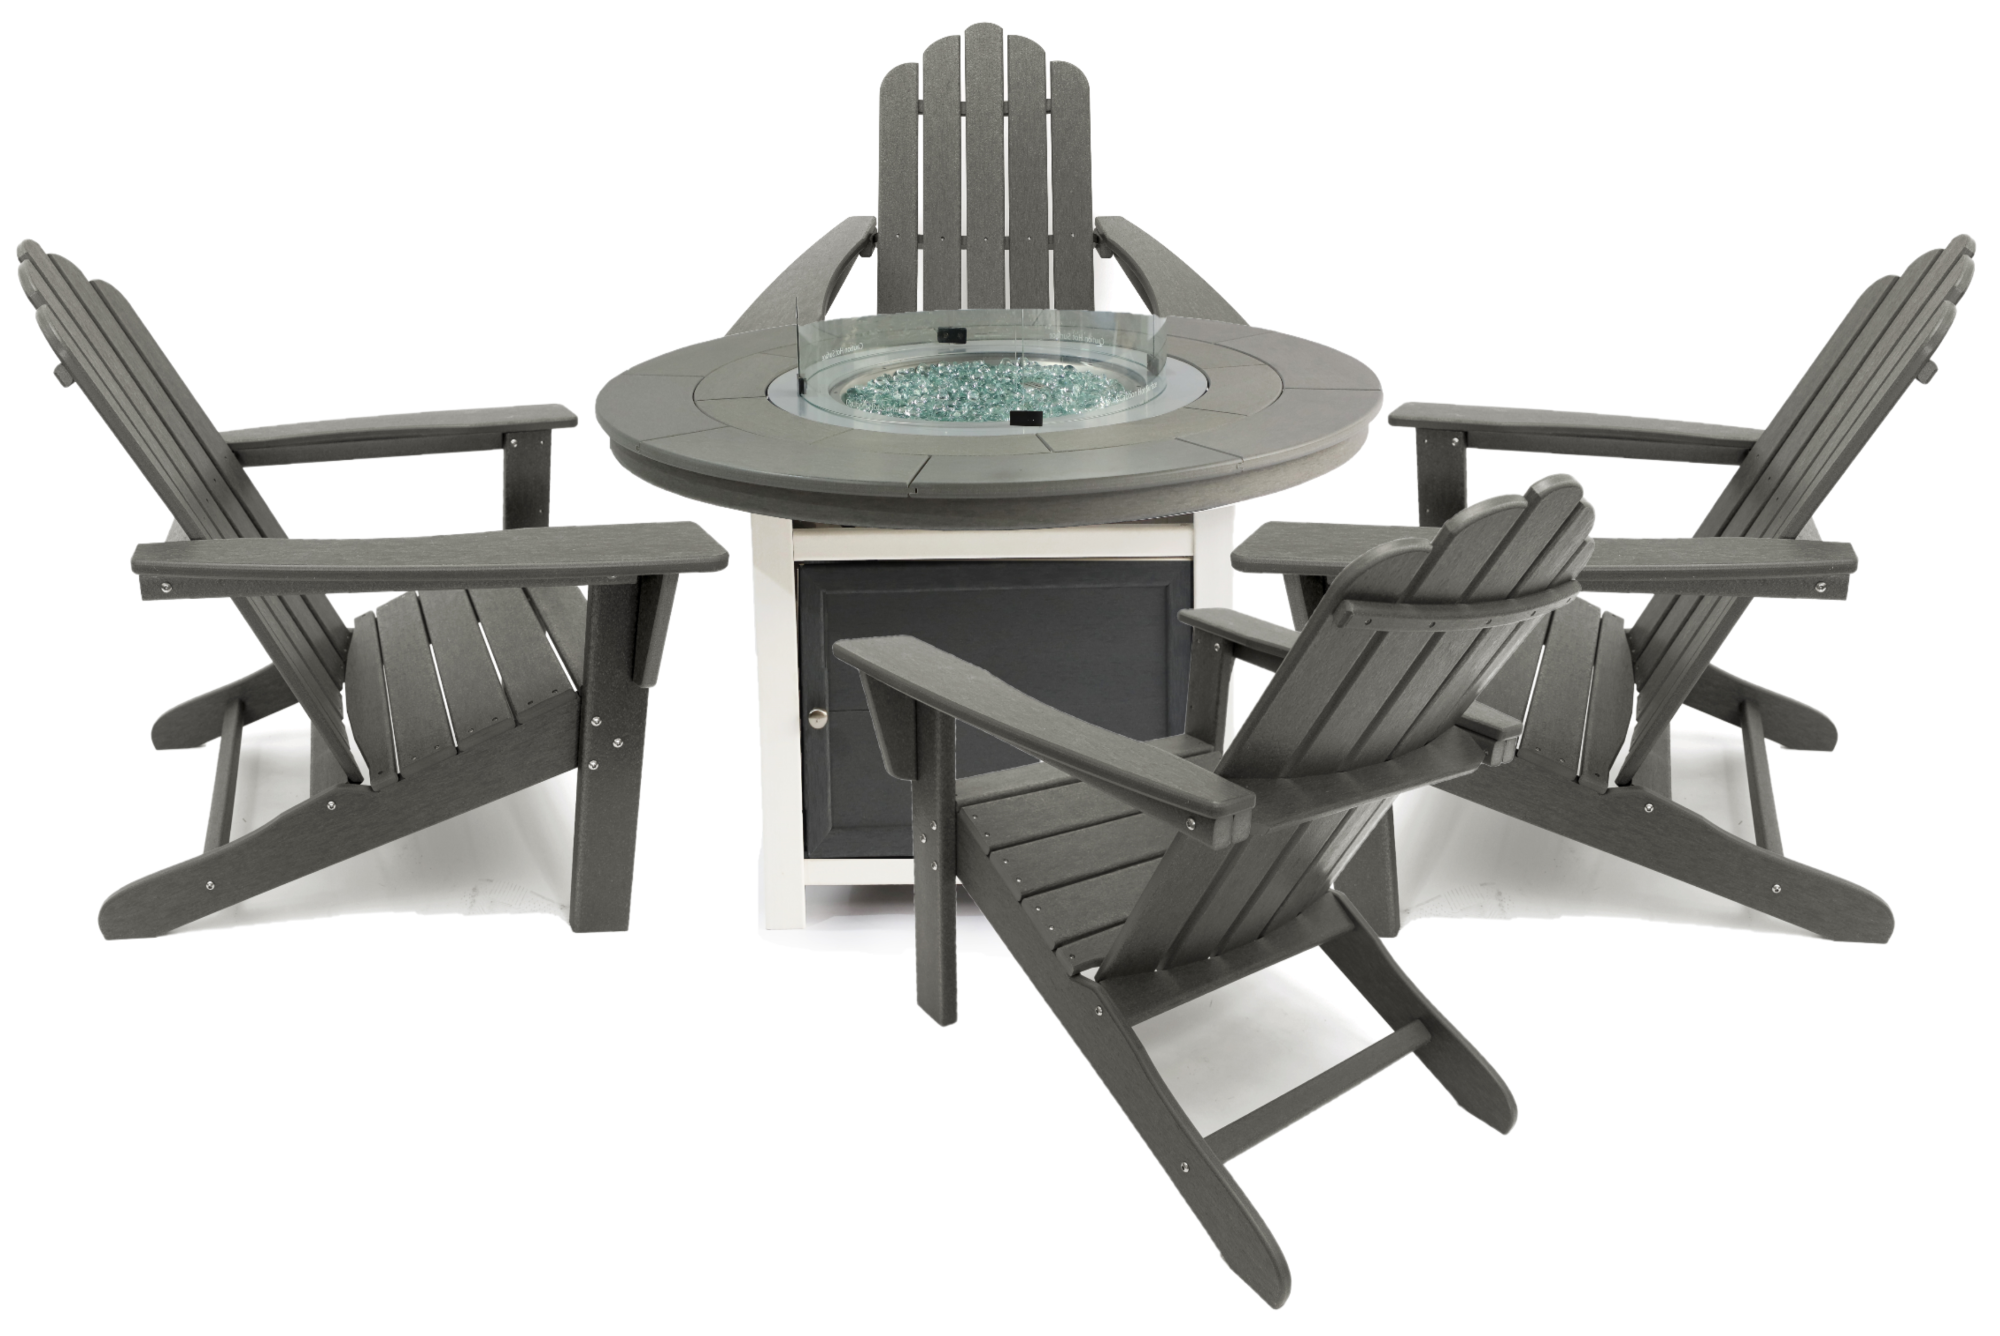 Vail 48" Two-Tone Fire Pit Table, Round Top with Four Marina Chairs